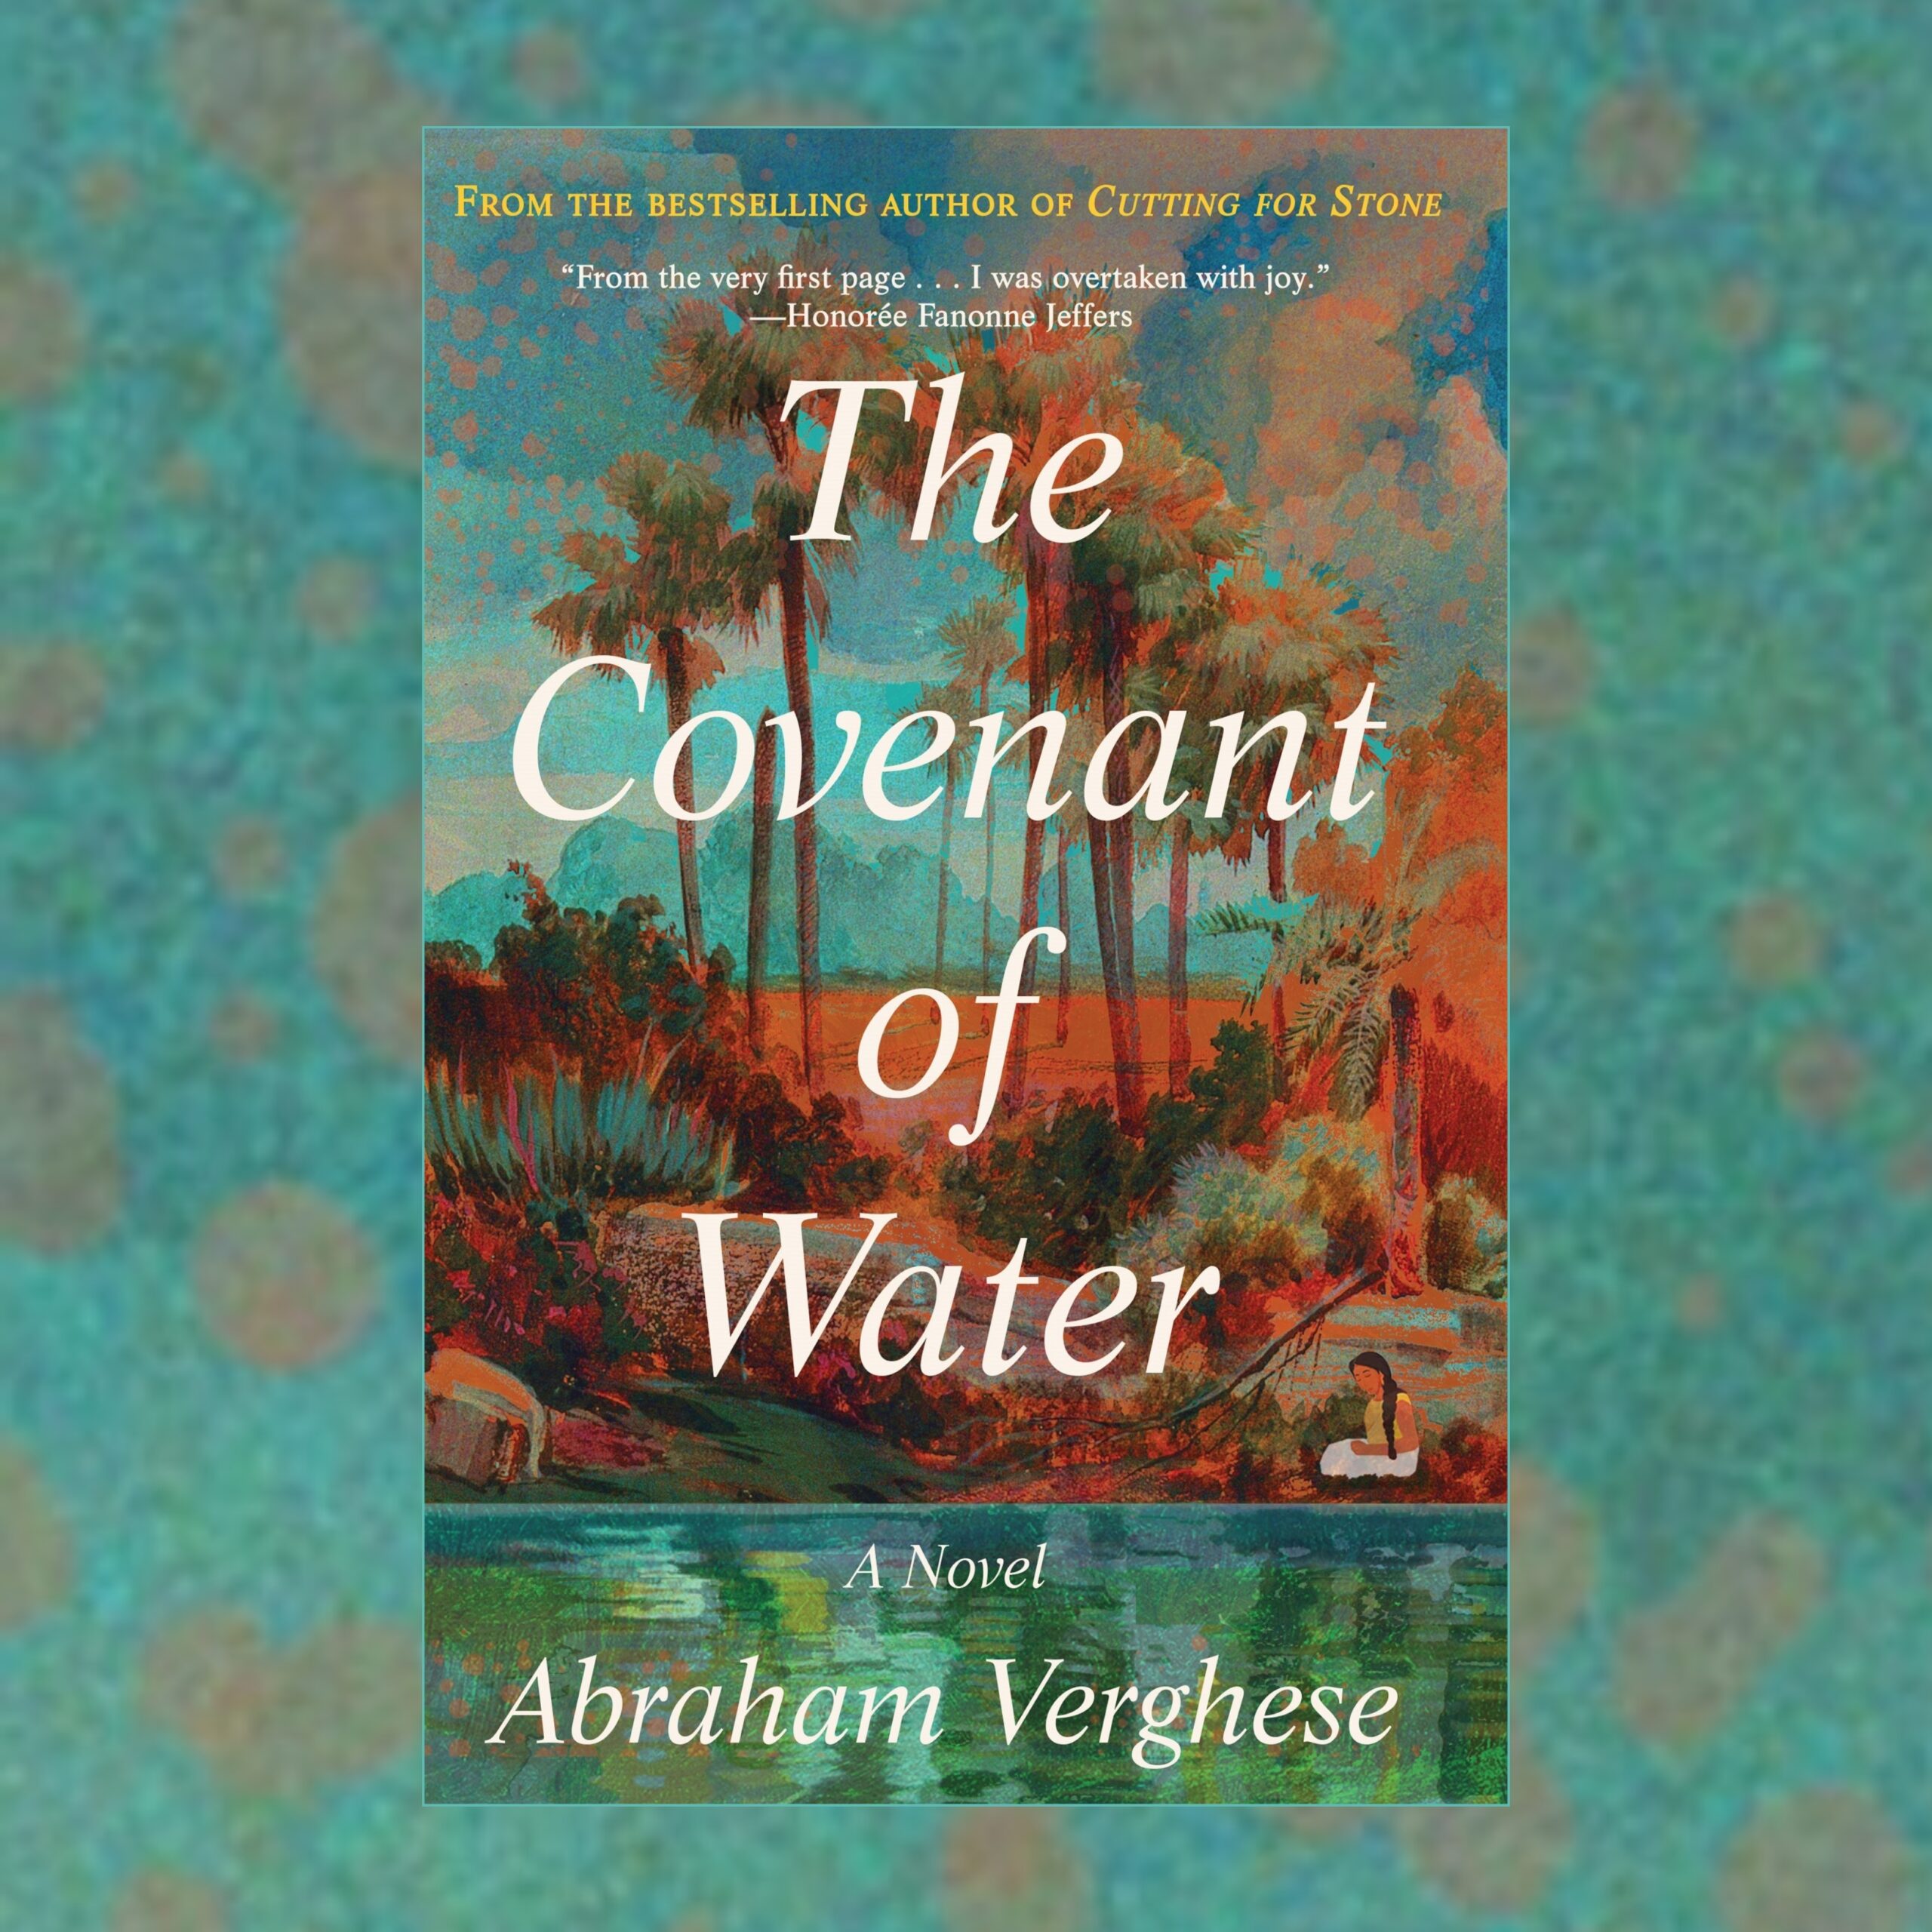 1818 - Abraham Verghese - The Covenant of Water | The Book Show